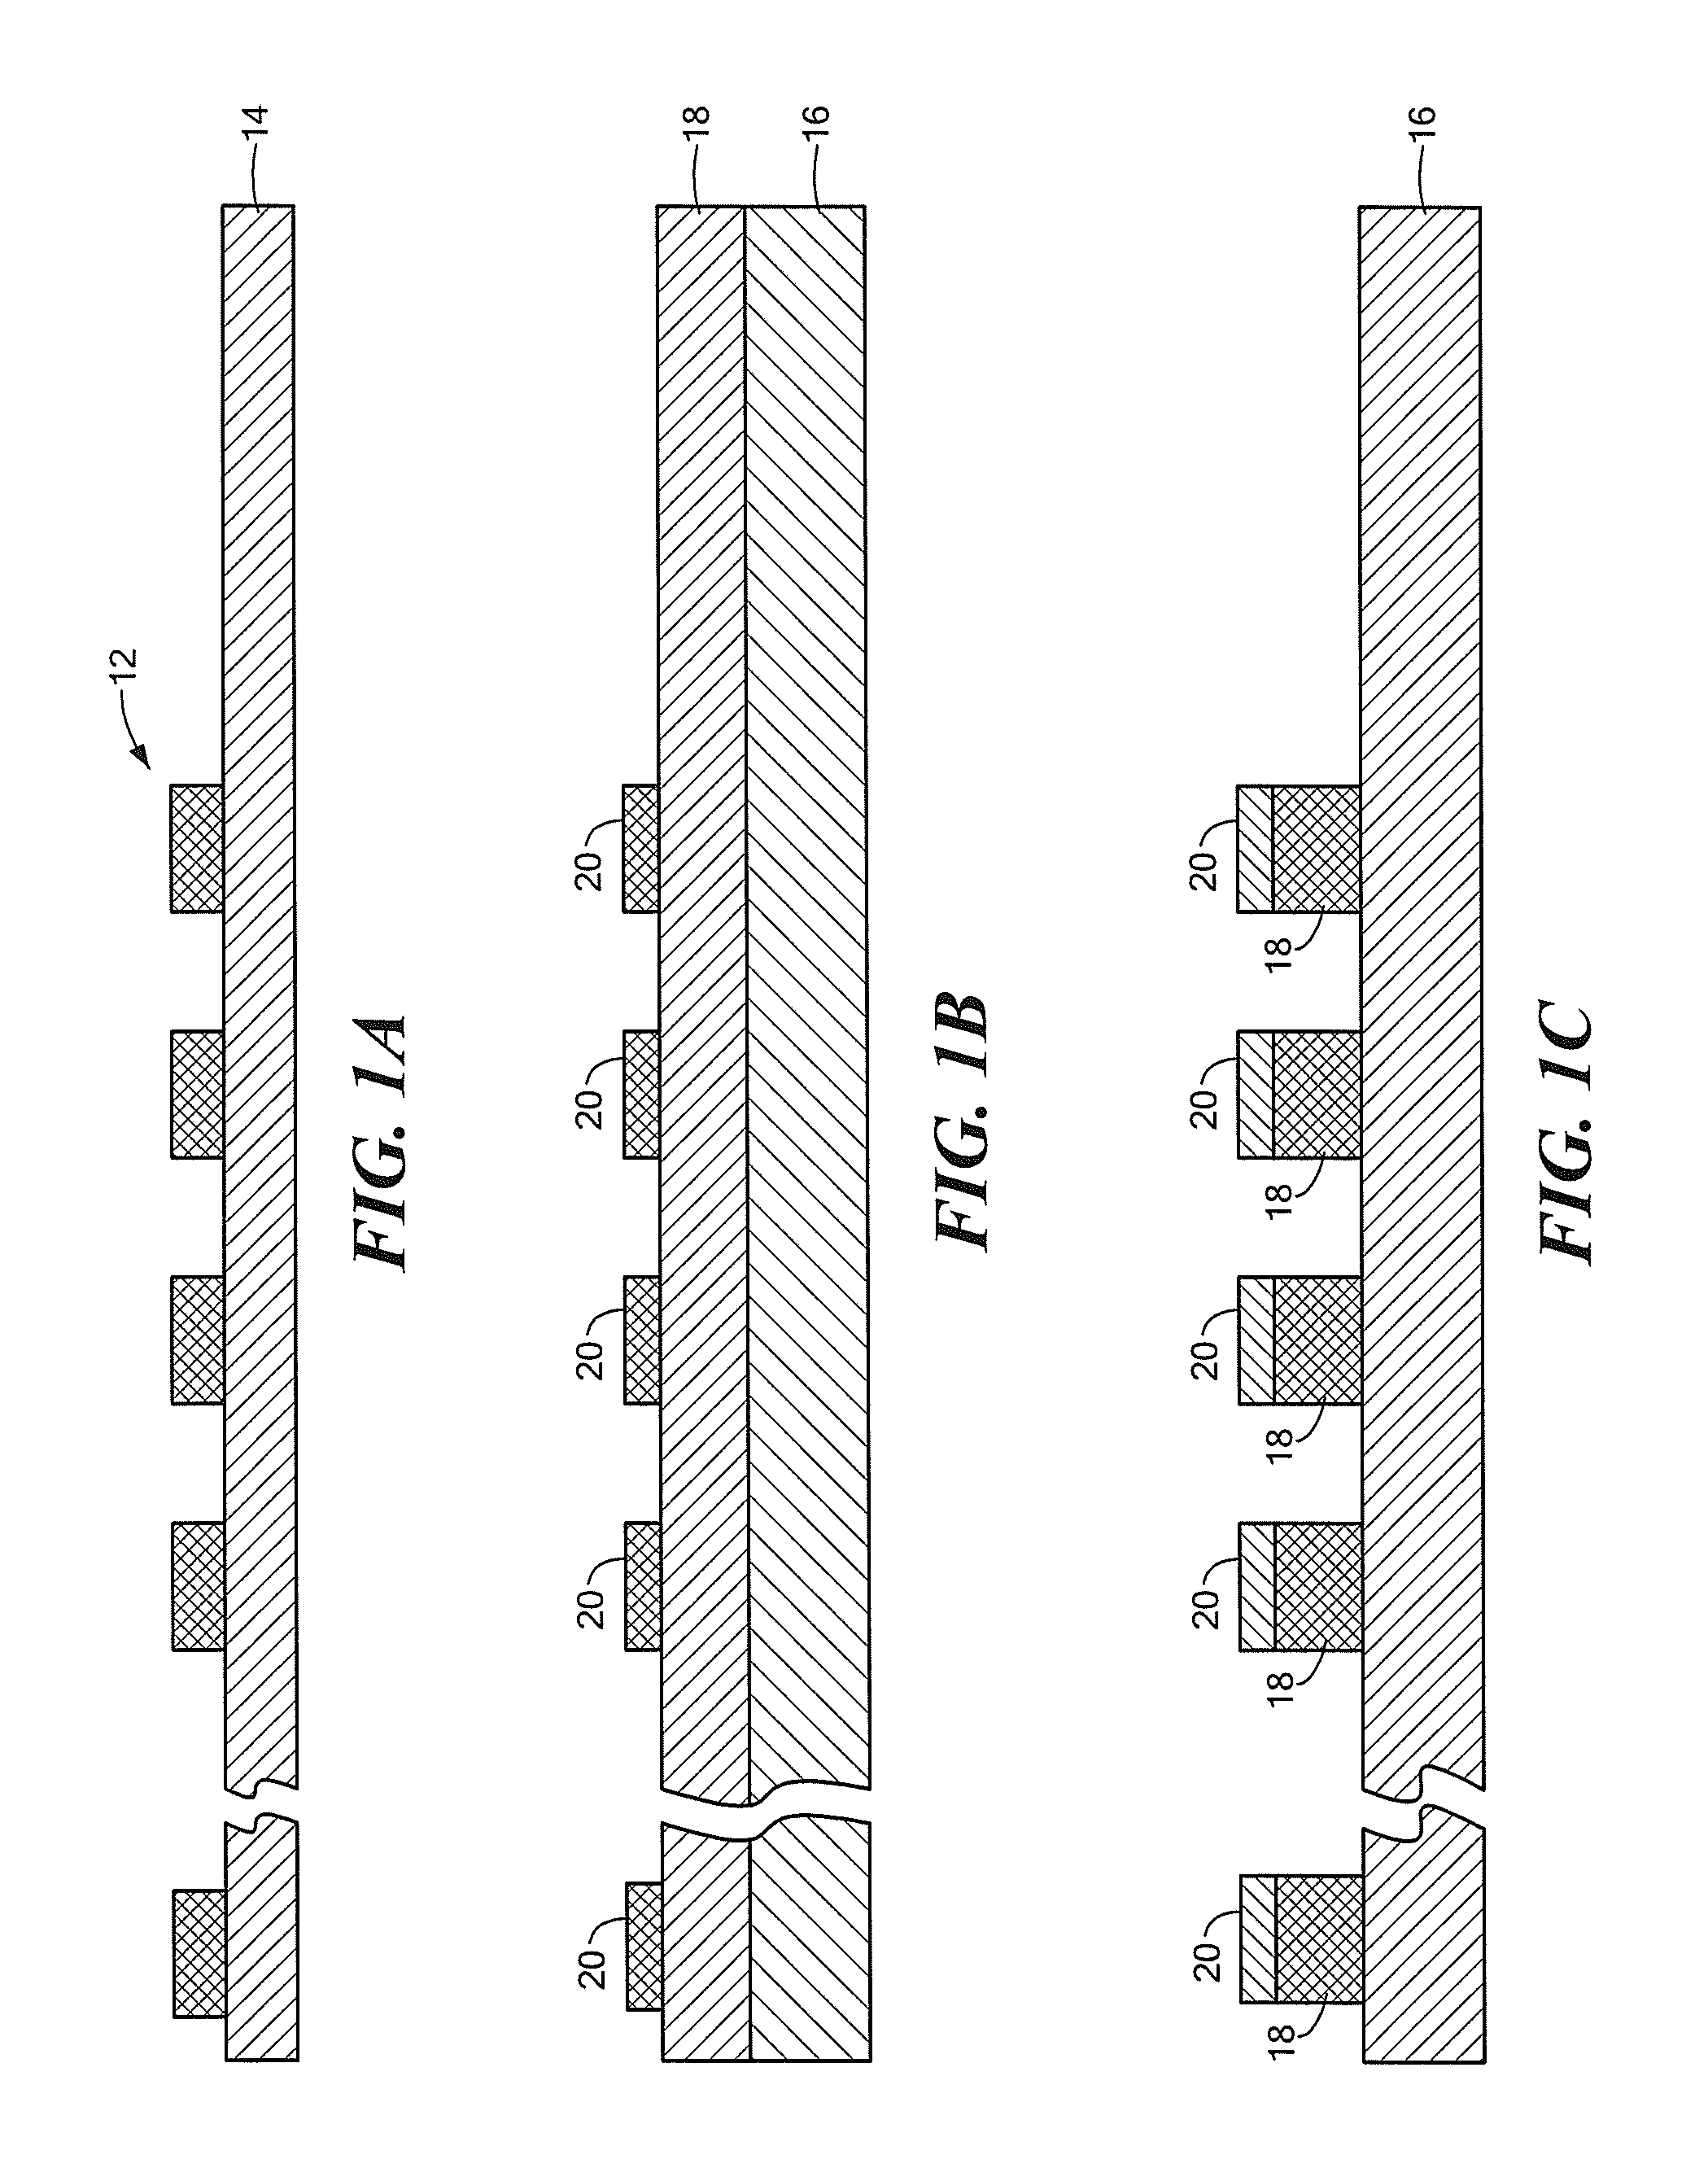 Method for processing semiconductors using a combination of electron beam and optical lithography